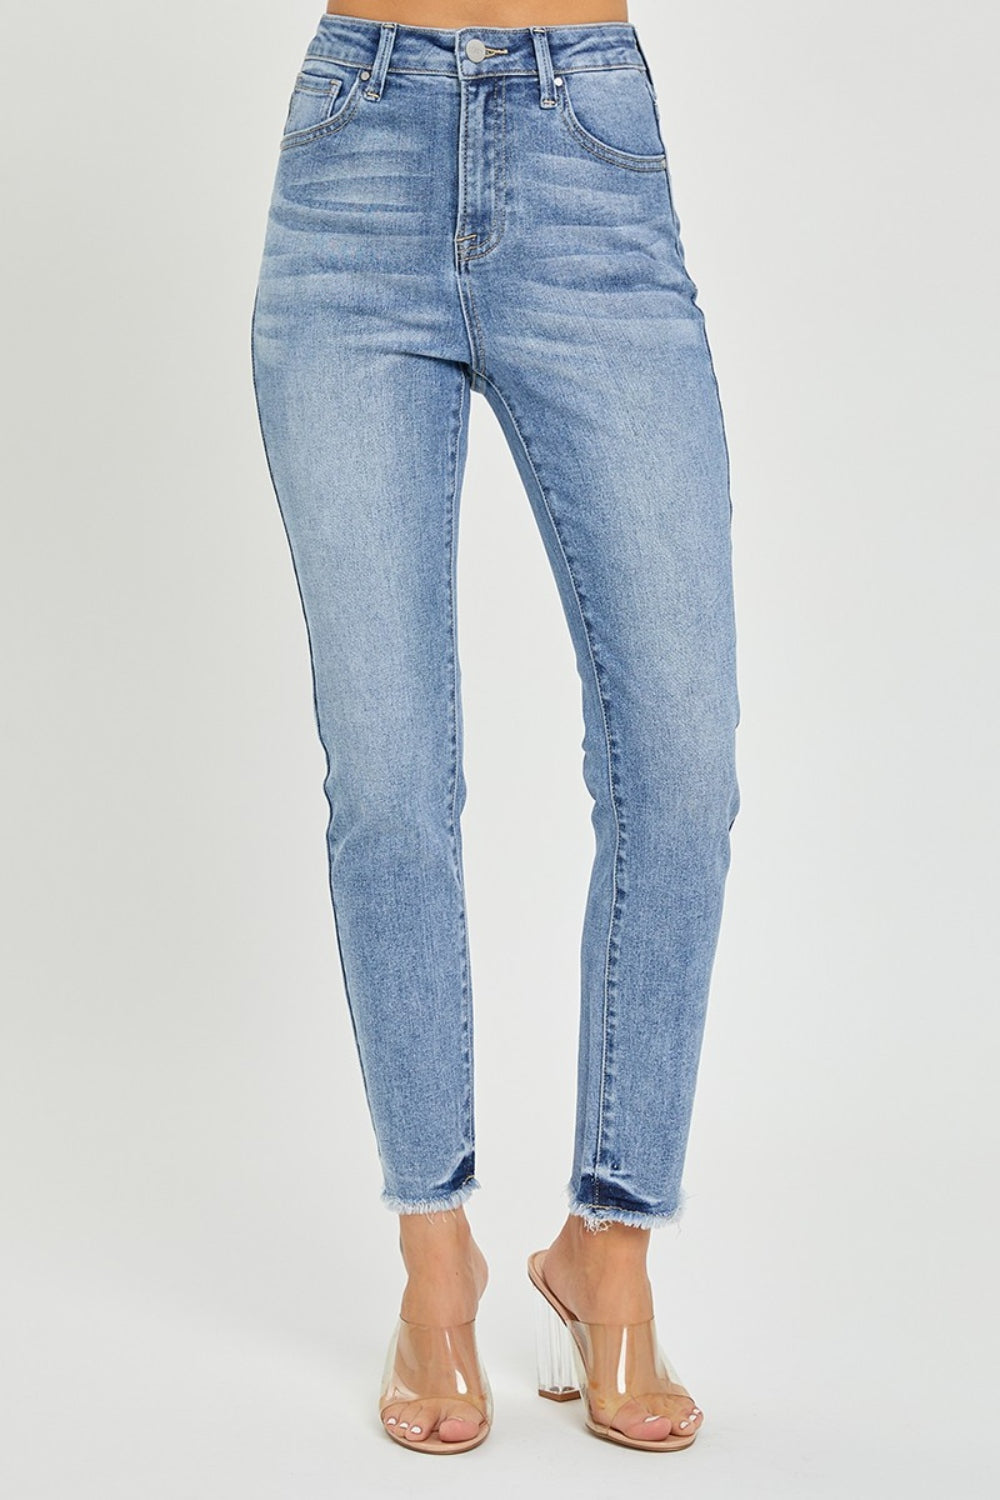 RISEN Full Size High Rise Frayed Hem Skinny Jeans-Denim-Inspired by Justeen-Women's Clothing Boutique